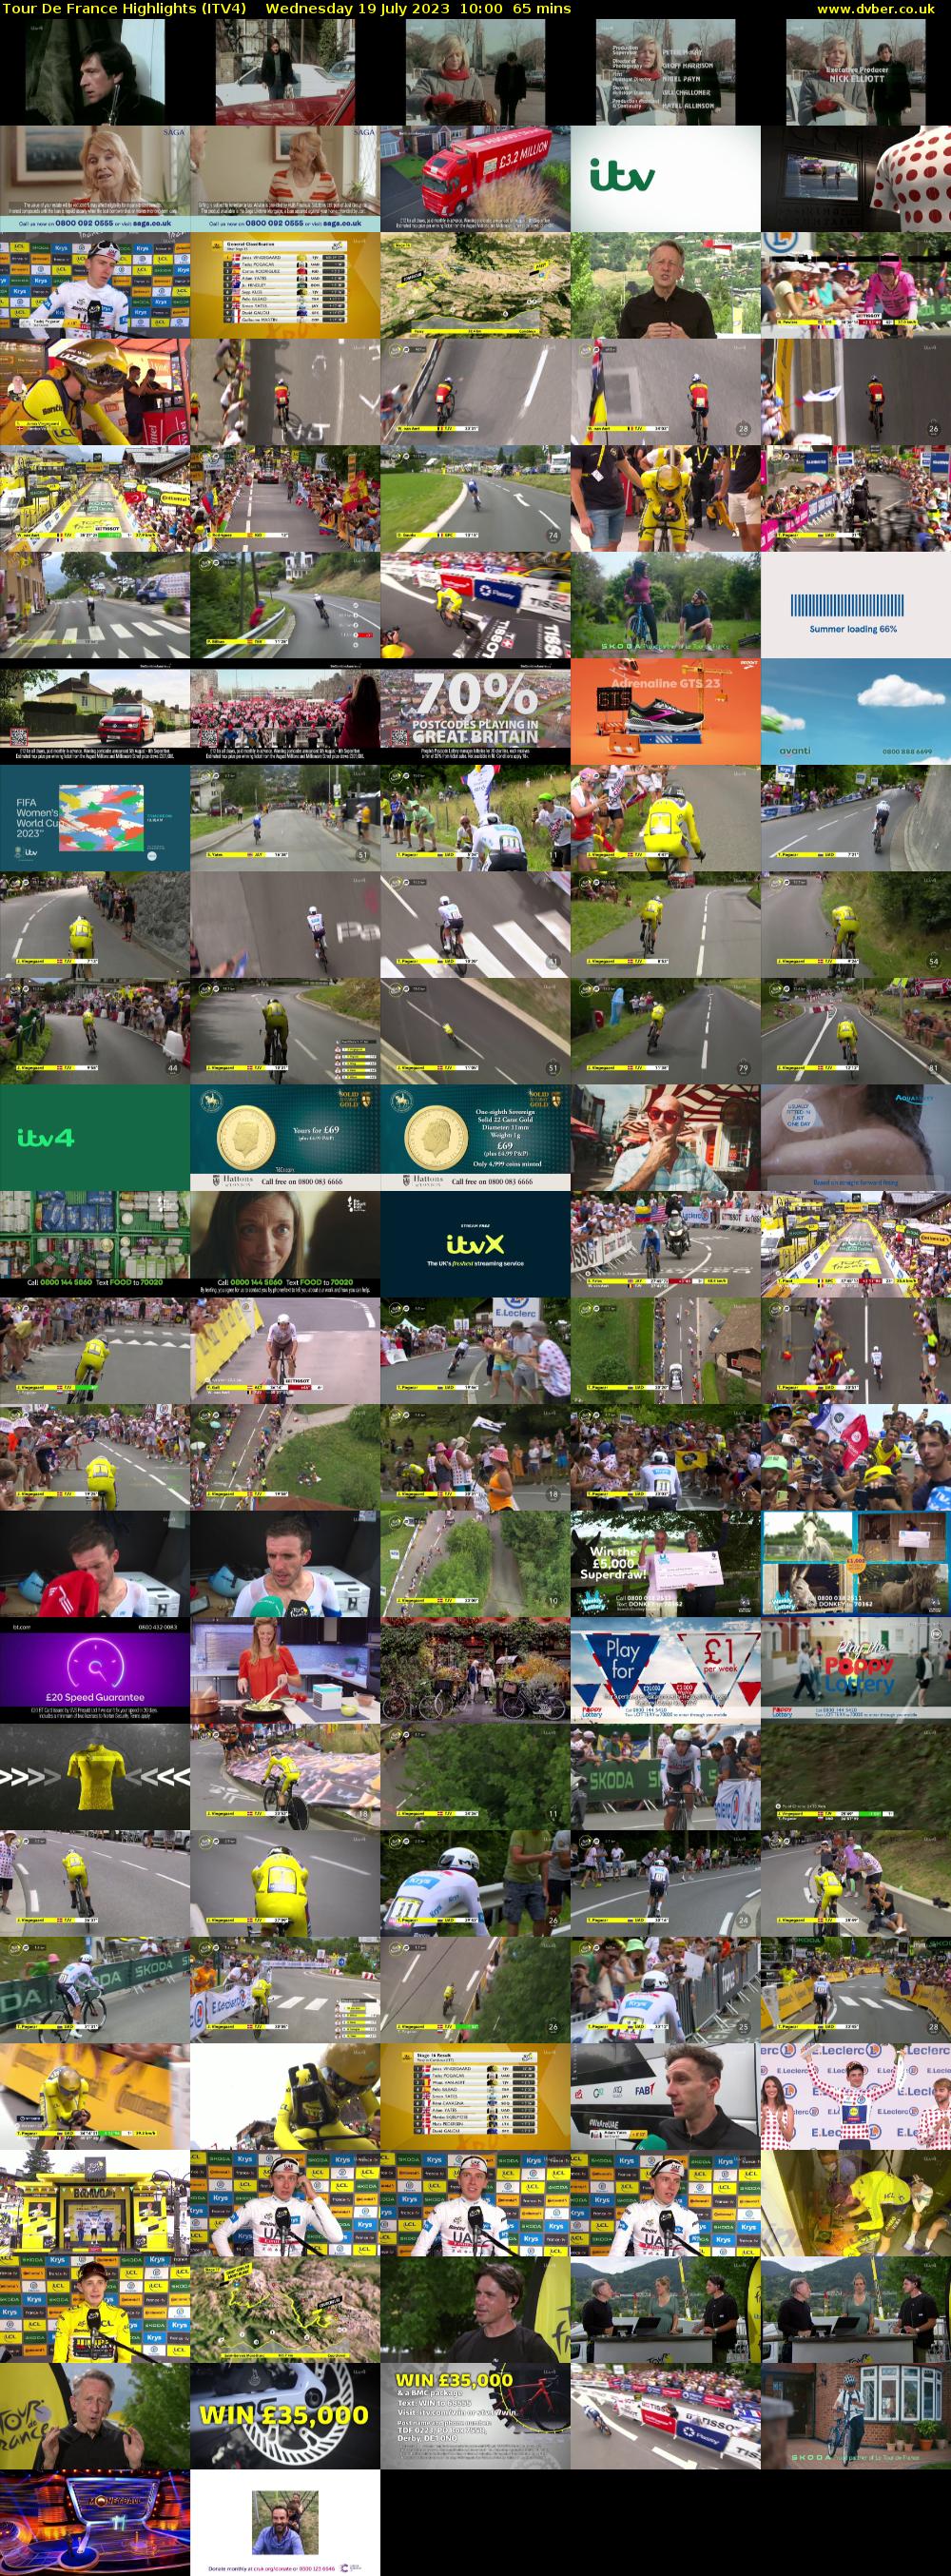 Tour De France Highlights (ITV4) Wednesday 19 July 2023 10:00 - 11:05